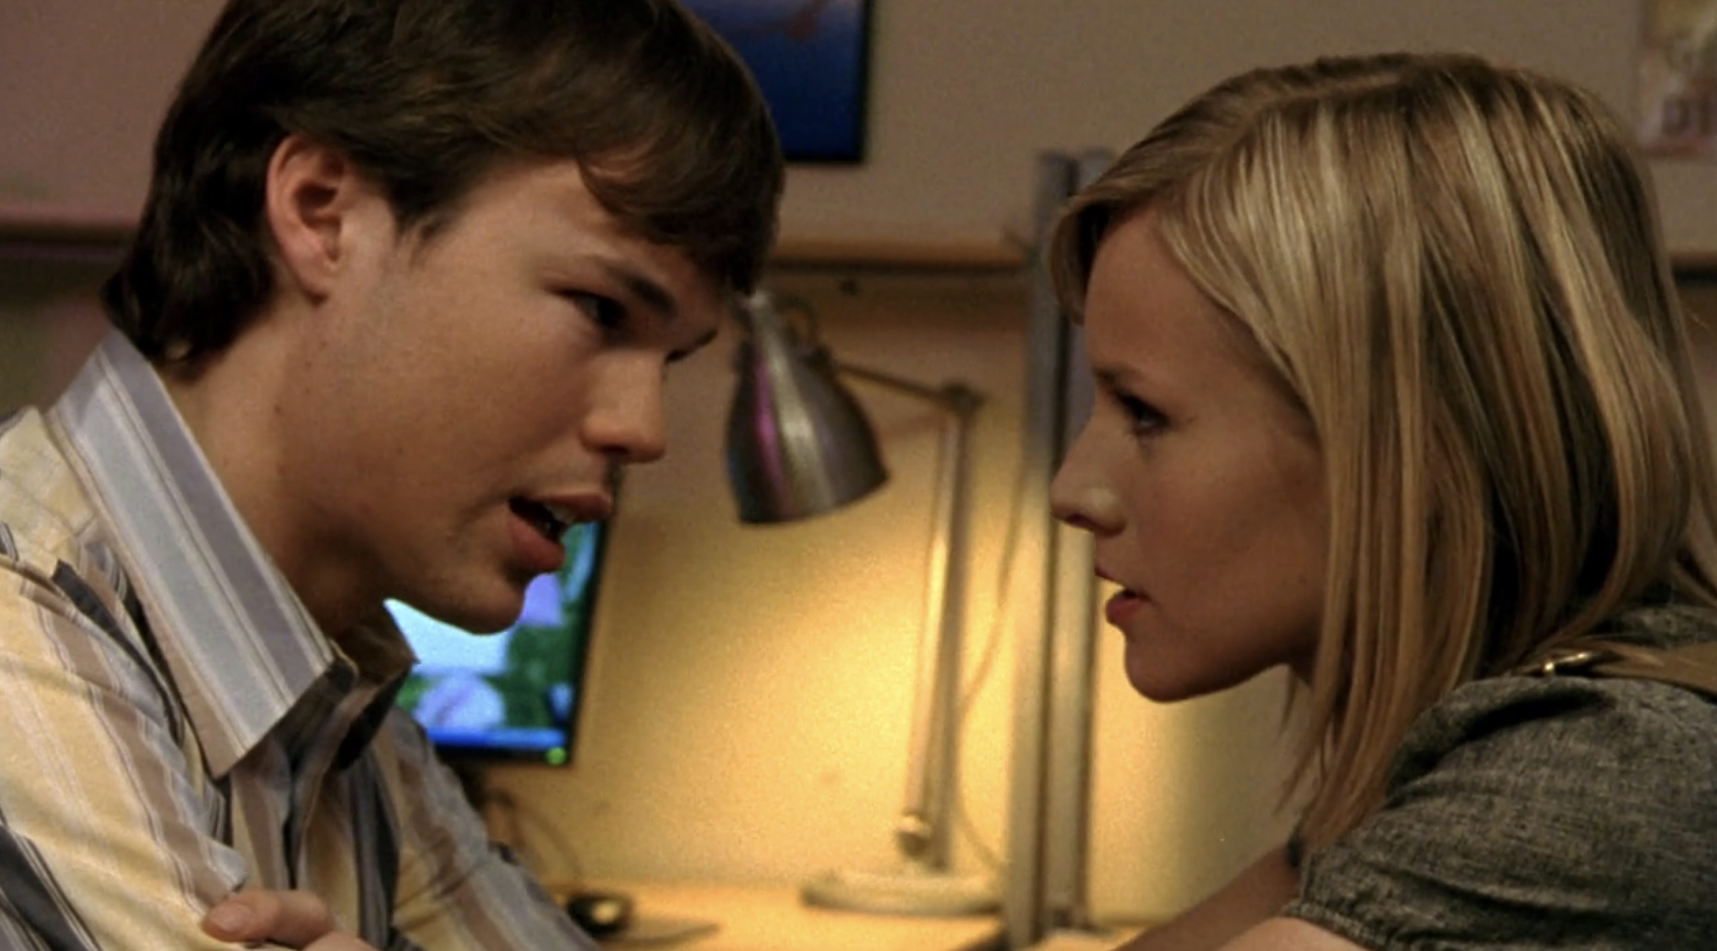 Screenshot from S1E21 of Veronica Mars. Veronica and Sean are sitting close to each other, almost forehead to forehead having an intense conversation.